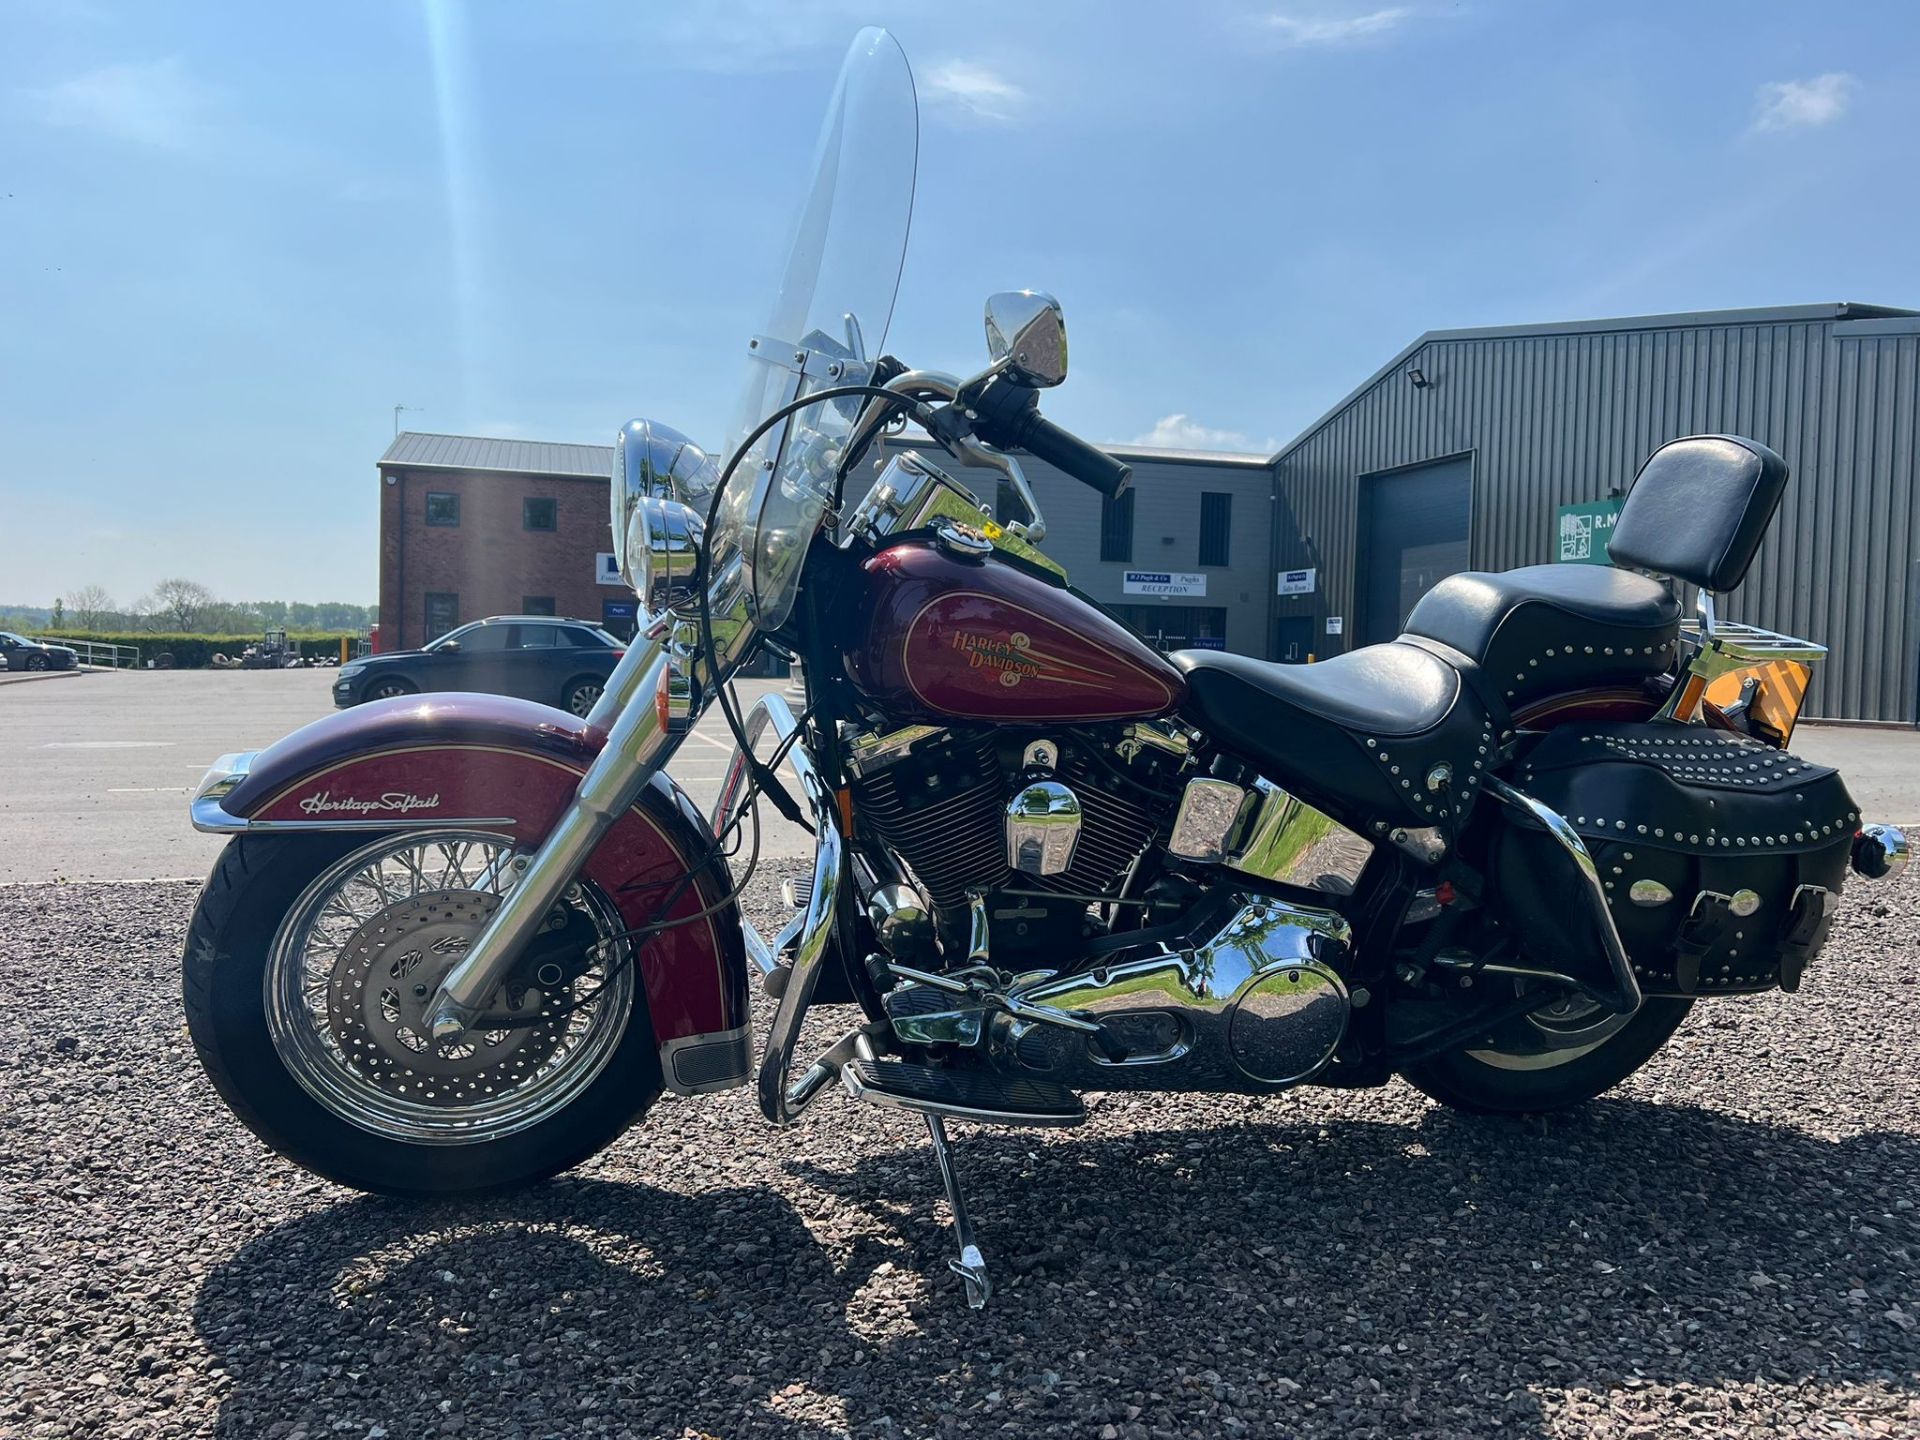 Harley Davidson FLSTC Heritage Softail motorcycle. 1995. 1340cc. Runs and rides well, ridden to - Image 4 of 11